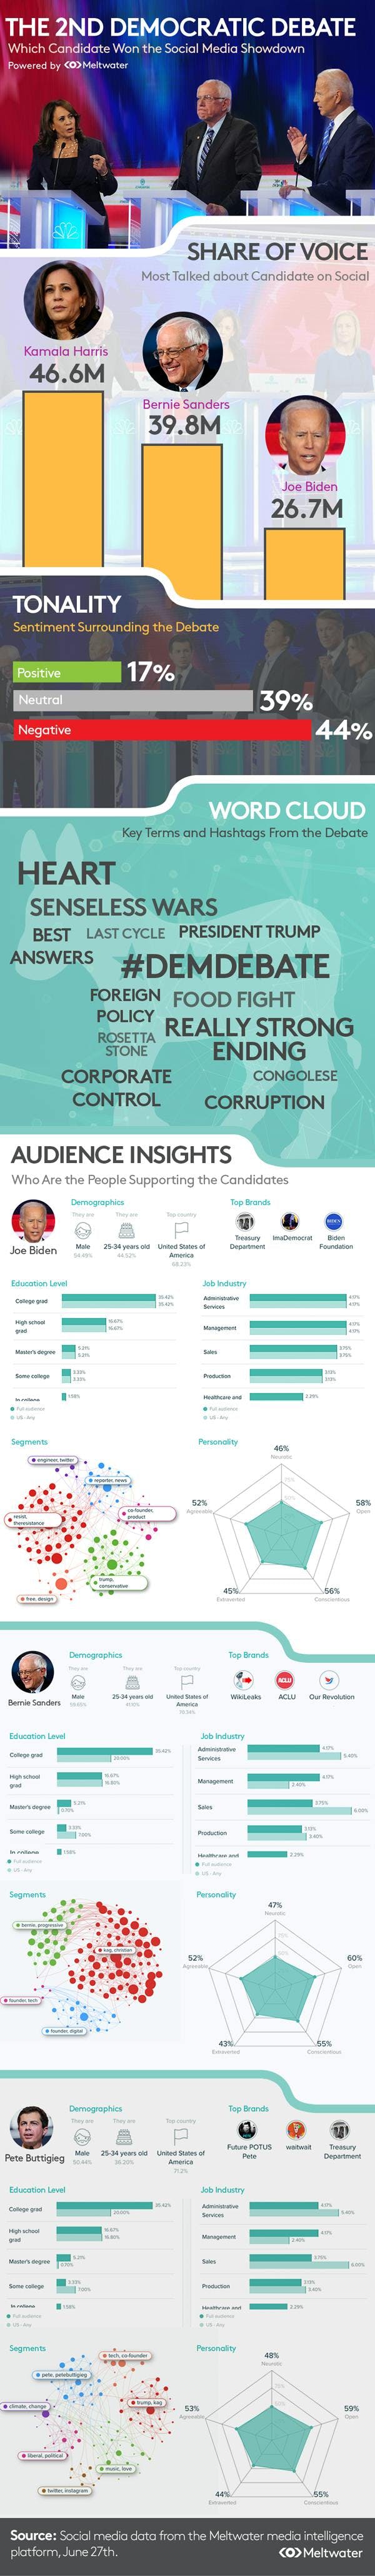 Infographic showing statistics from the 2nd Democratic Debate (from top): Share of Voice, Tonality, Word Cloud, and Audience Insights